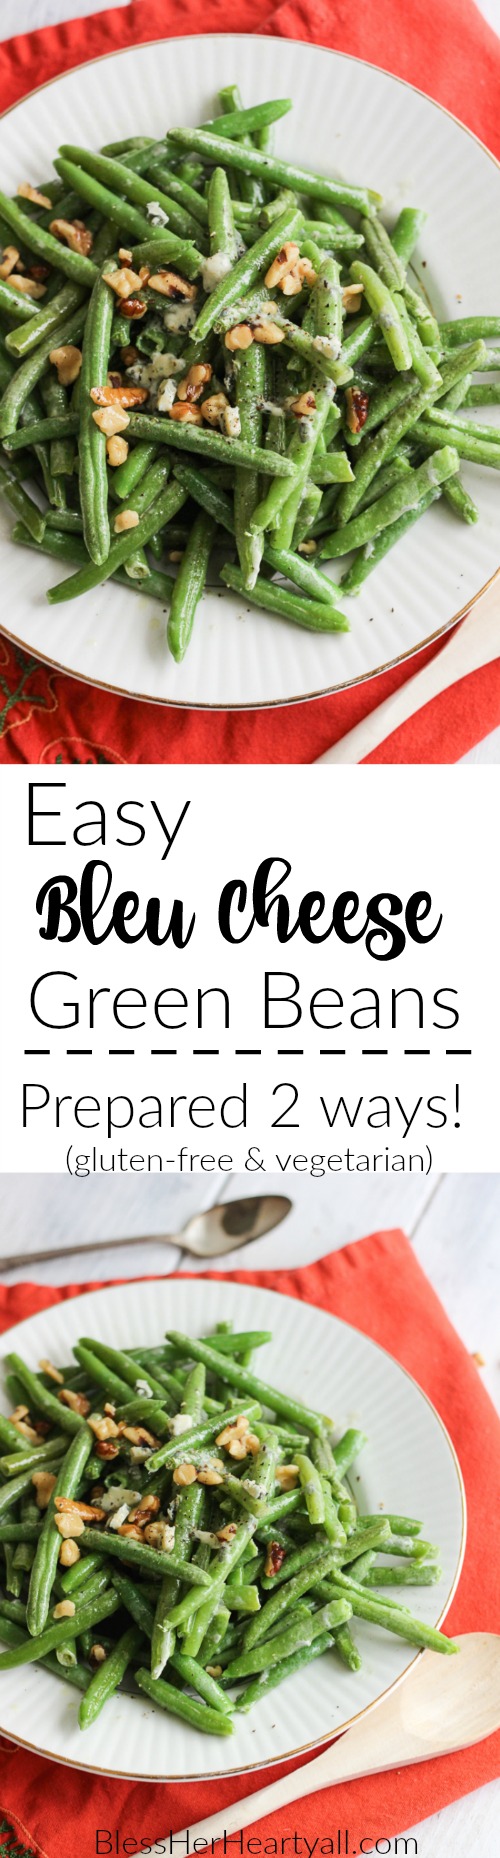 Easy bleu cheese green beans Fresh green beans are prepared {can be prepared in TWO ways!} with a decadent blue cheese sauce drizzled and stirred over top for a warm, hearty, cheesy, creamy gluten-free addition to your holiday table. And the best part? It will look like you had been in the kitchen sweating to make this dish happen, when in reality… it was soooooo easy-peasy. | www.blessherheartyall.com|